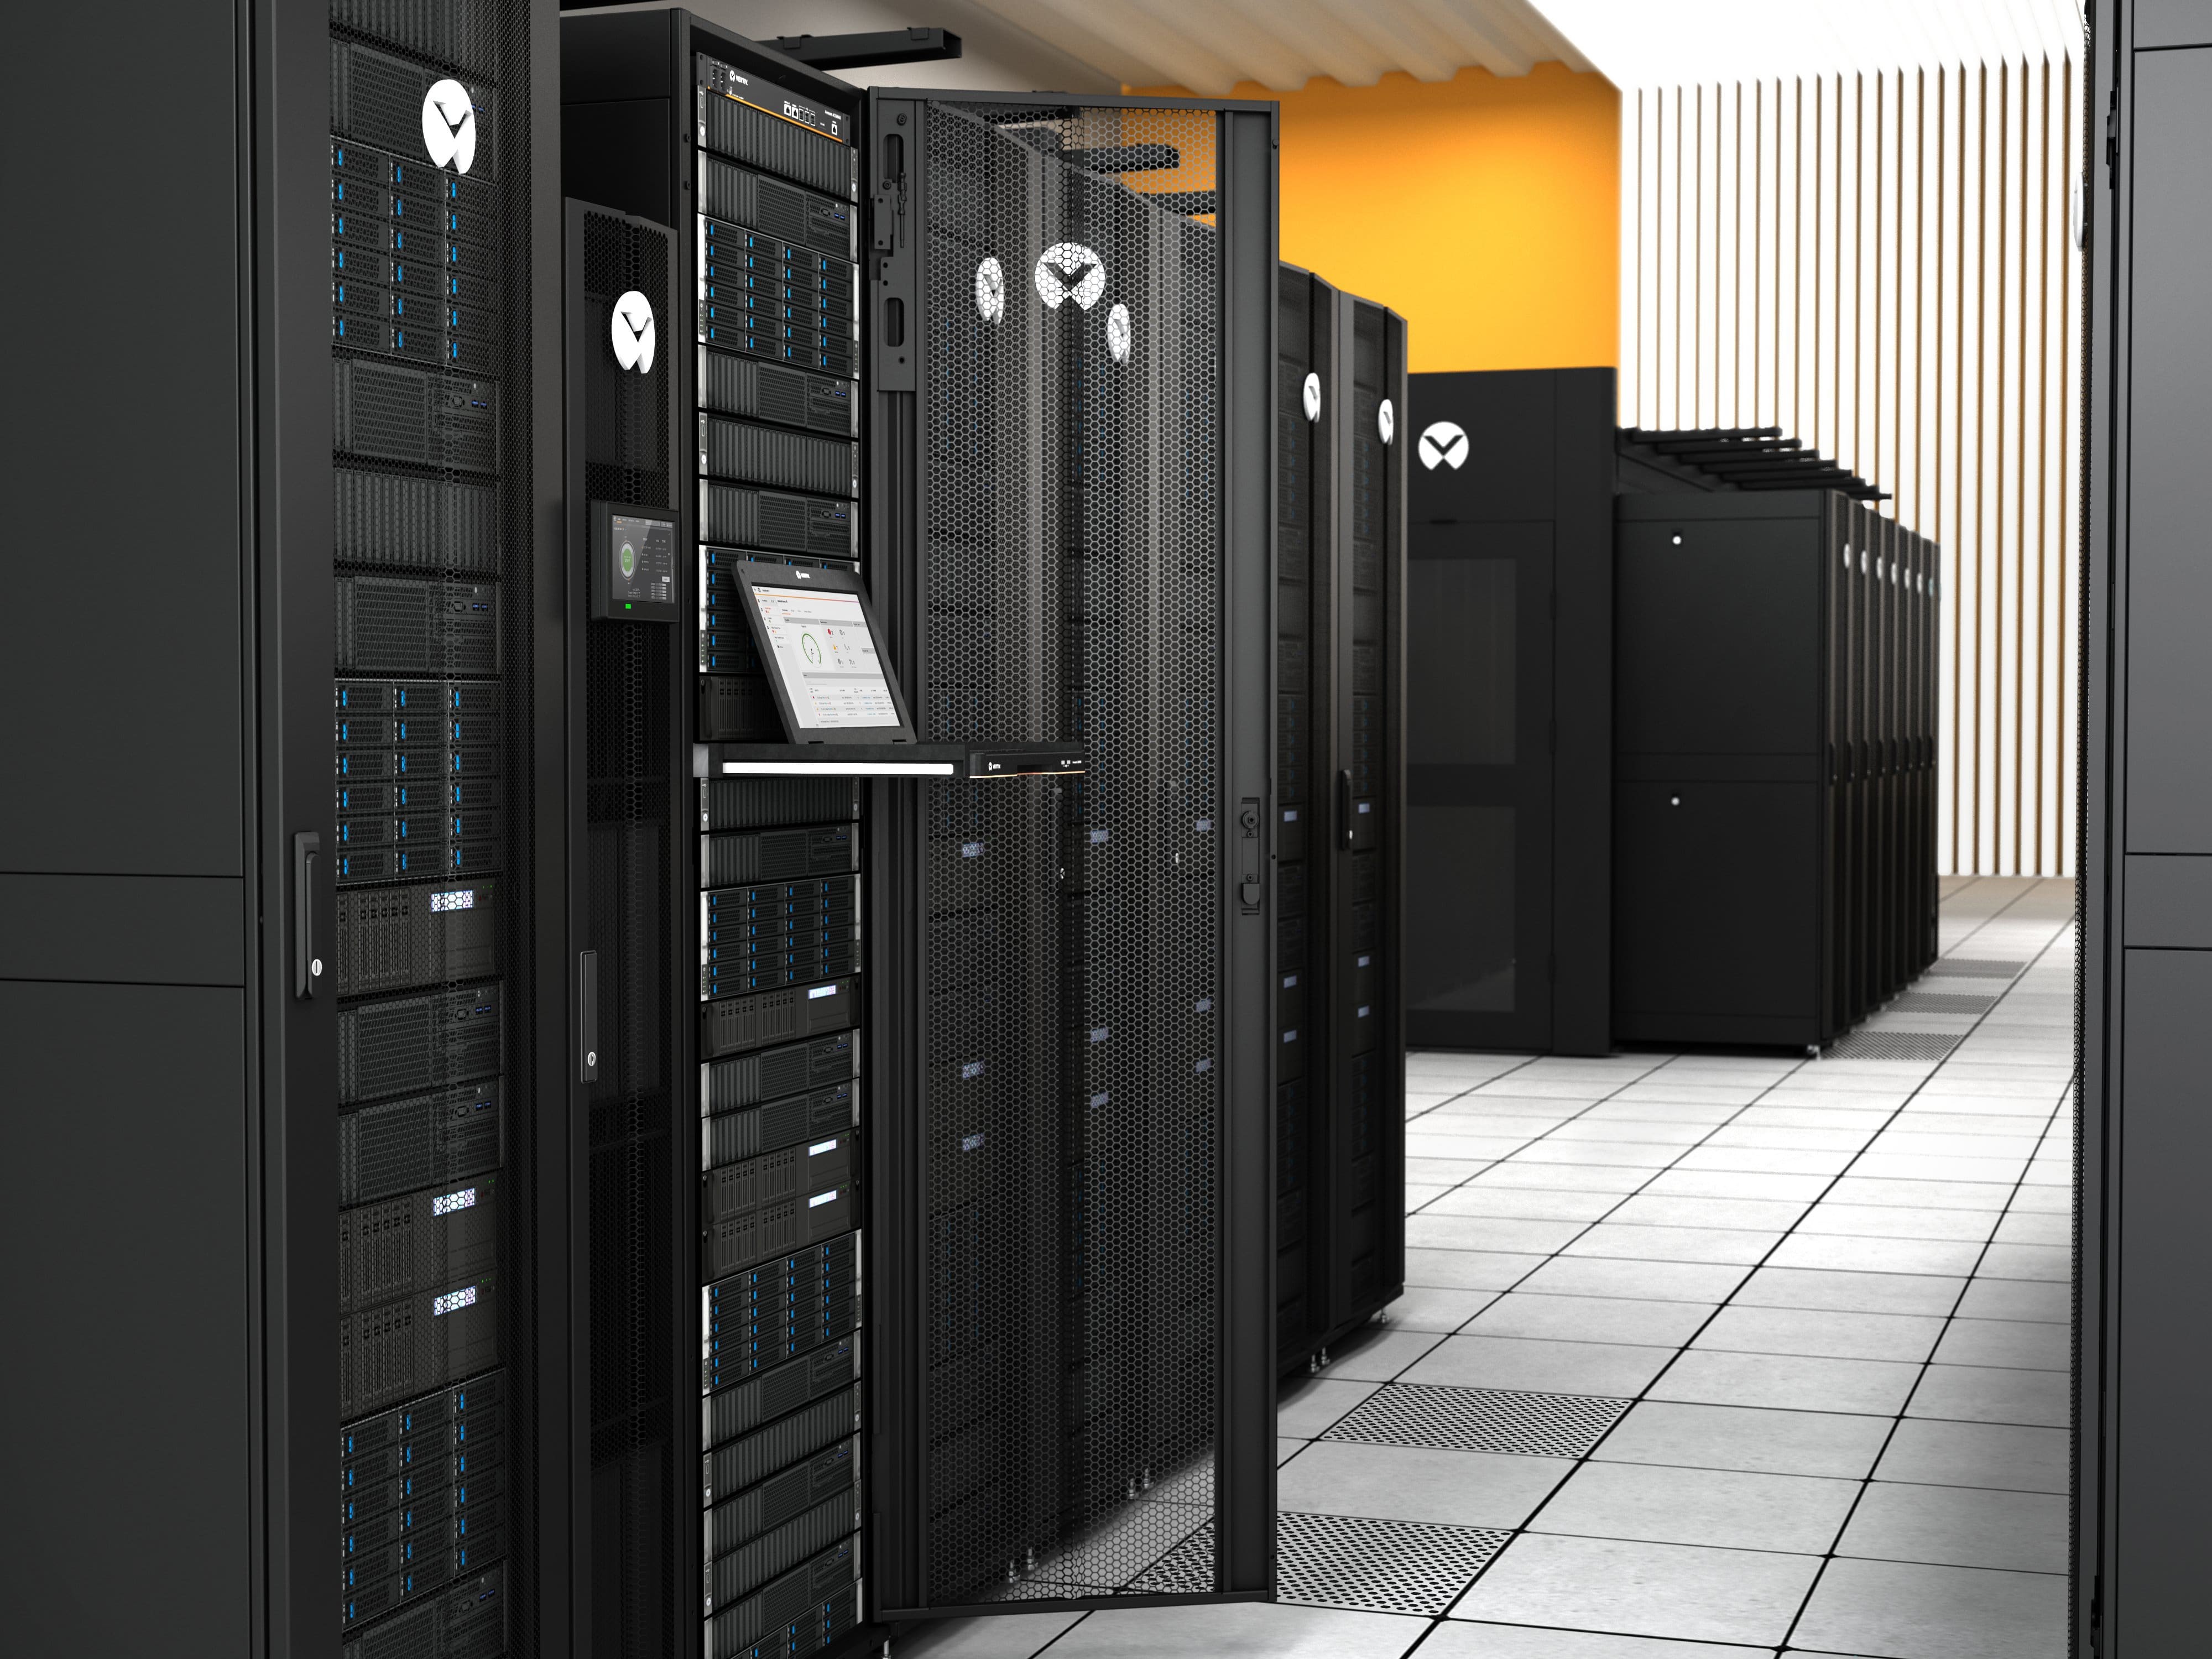 vertiv-data-center-solutions-featuring-aisle-containment-and-remote-monitoring-min-1685952394.jpg